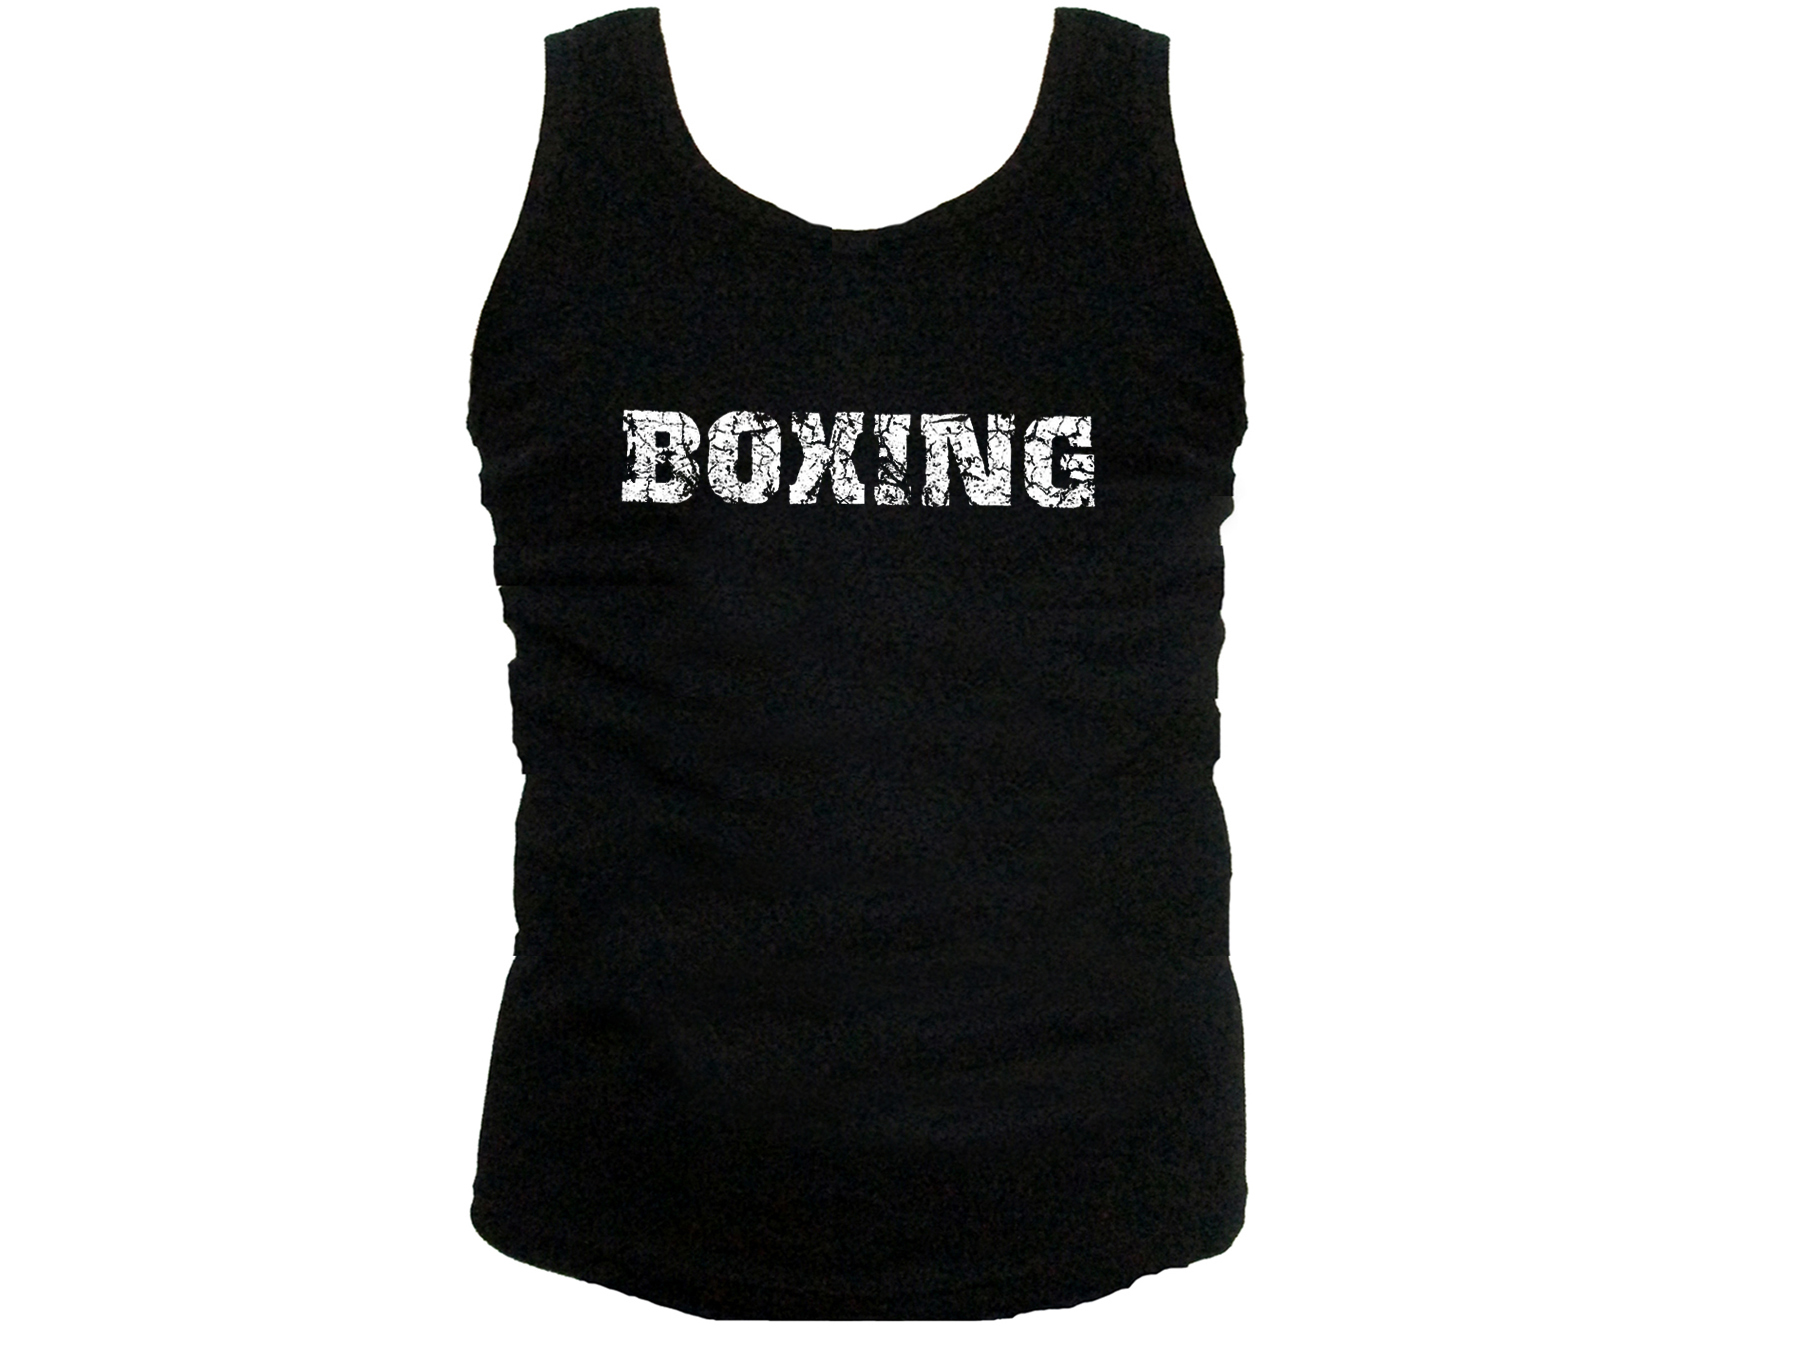 Boxing distressed look muscle gym tank top